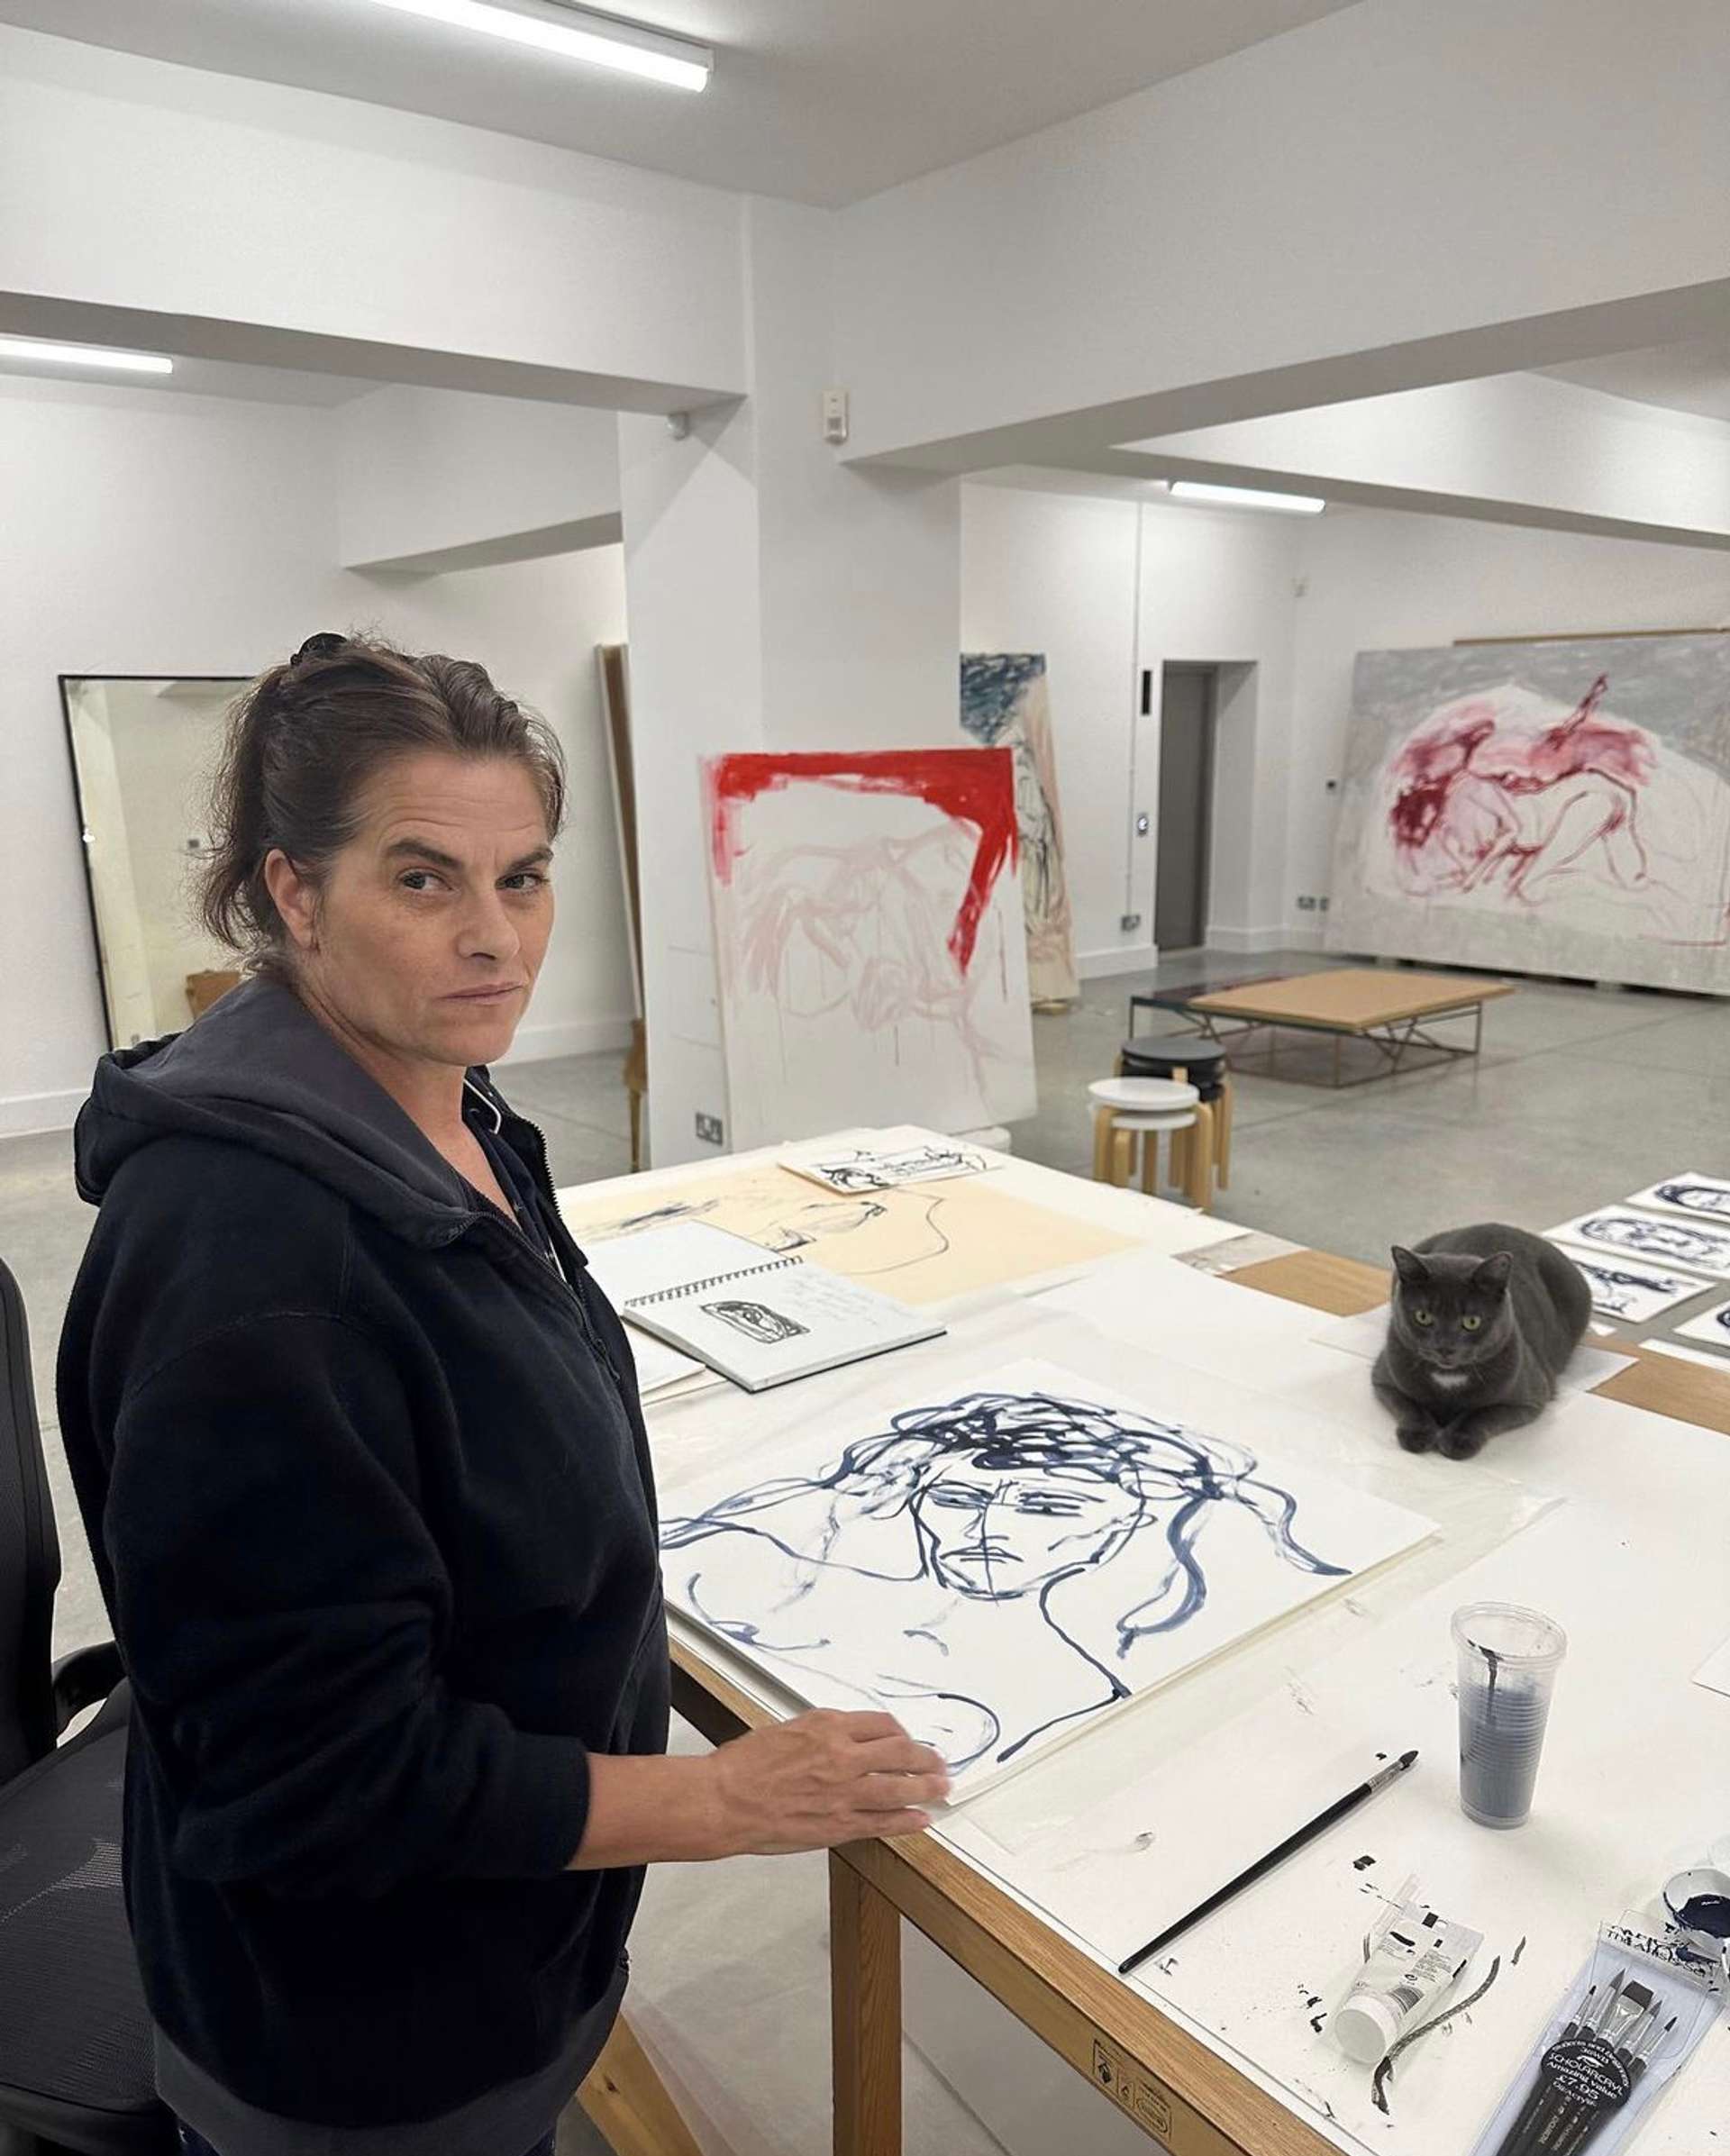 An image of the artist Tracey Emin in her studio, drawing the works that were engraved on the bronze doors. The artist is looking into the camera as a cat lies in the background.